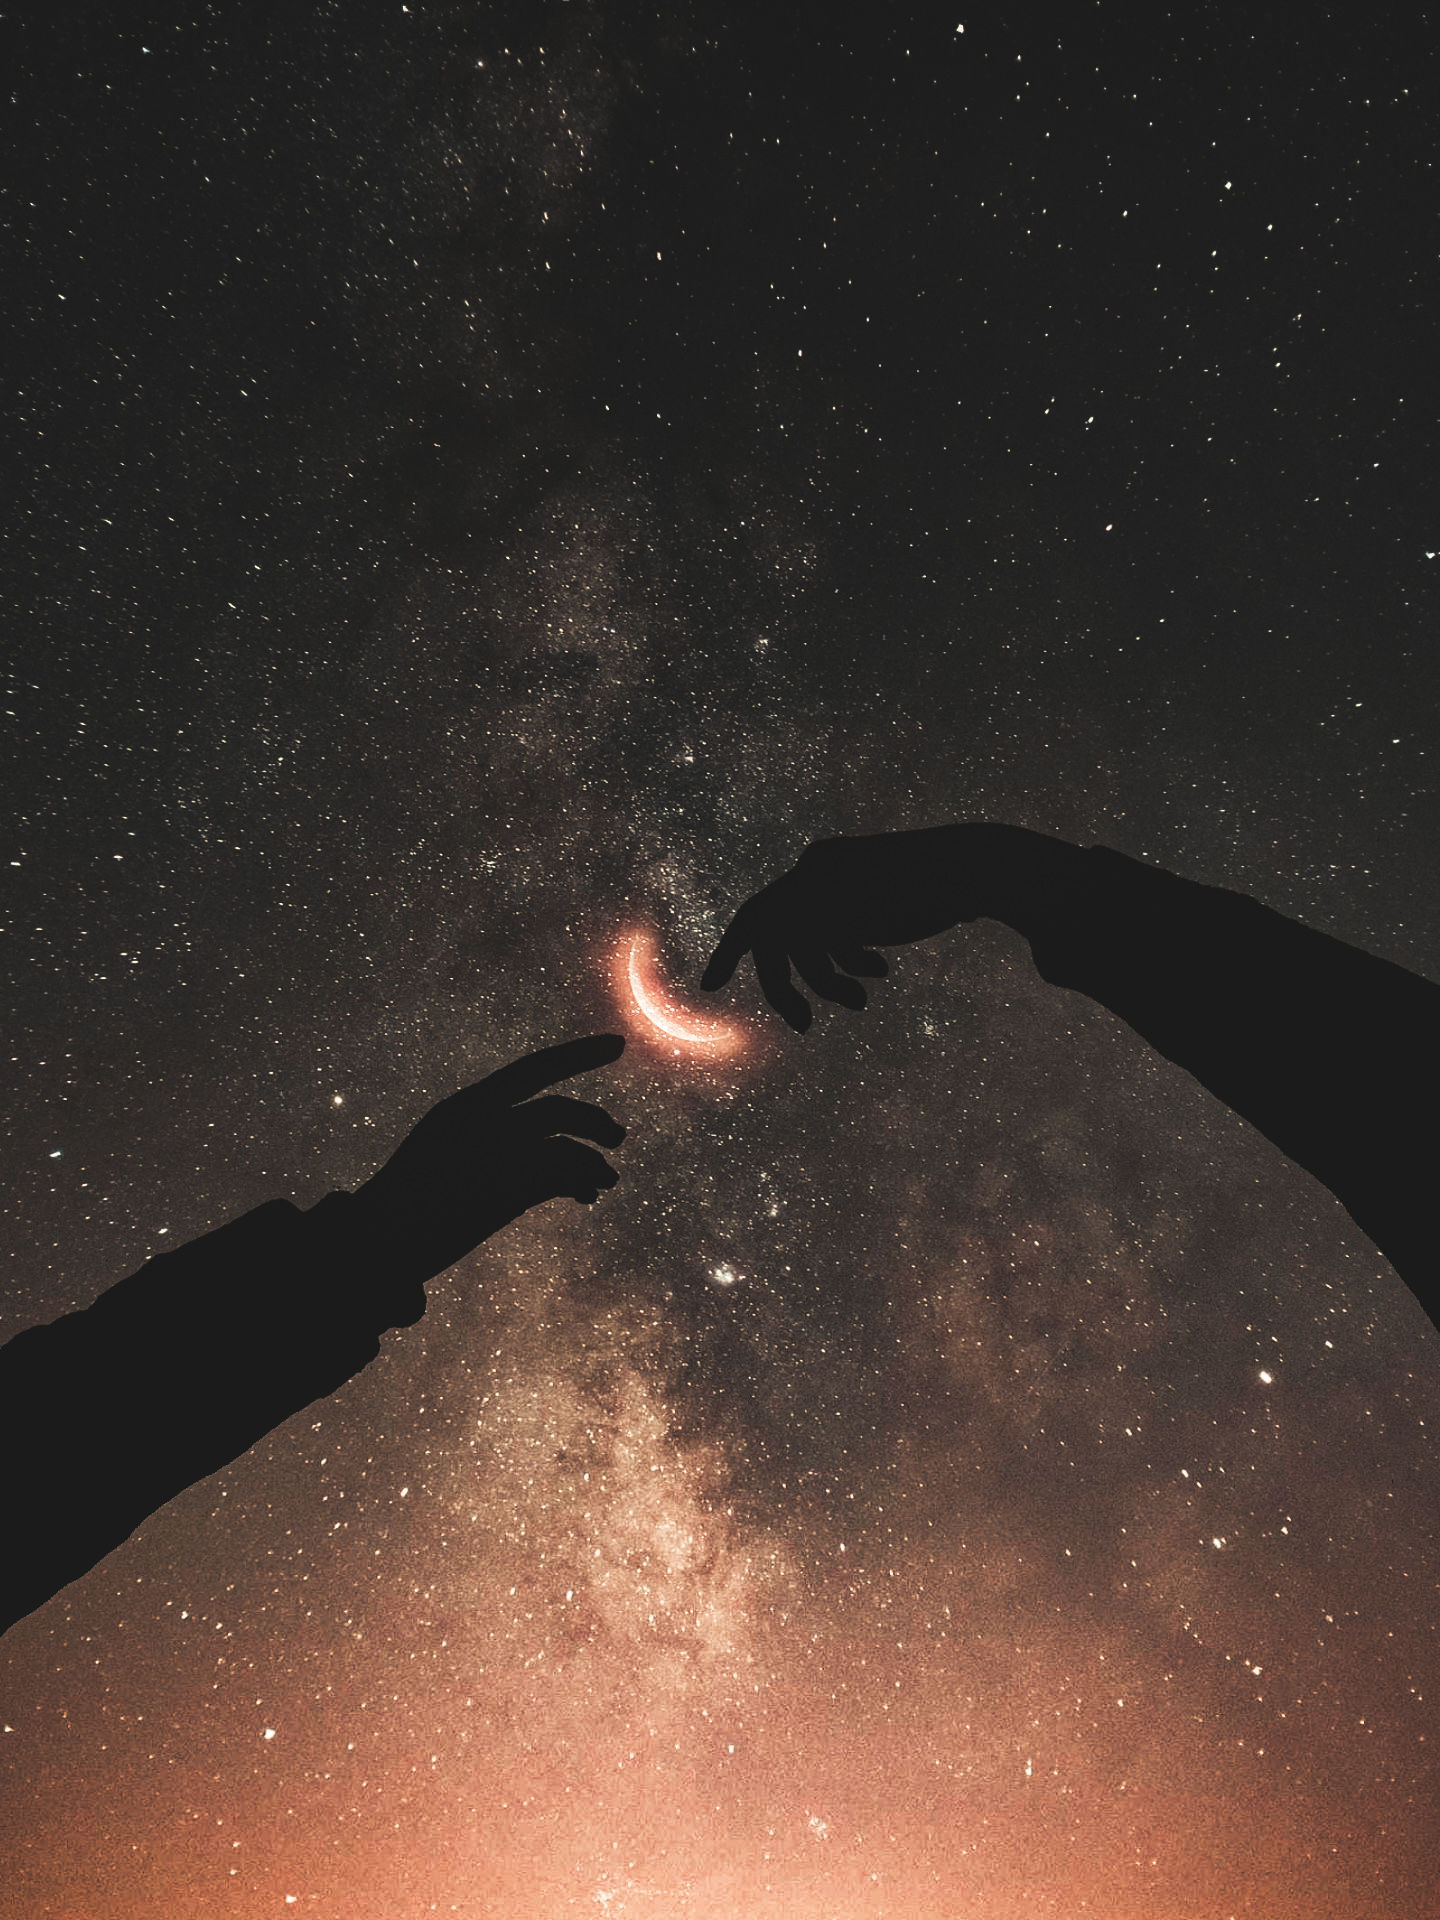 night, real people, nature, star - space, space, hand, human hand, sky, astronomy, people, lifestyles, star field, star, unrecognizable person, outdoors, scenics - nature, galaxy, motion, leisure activity, finger